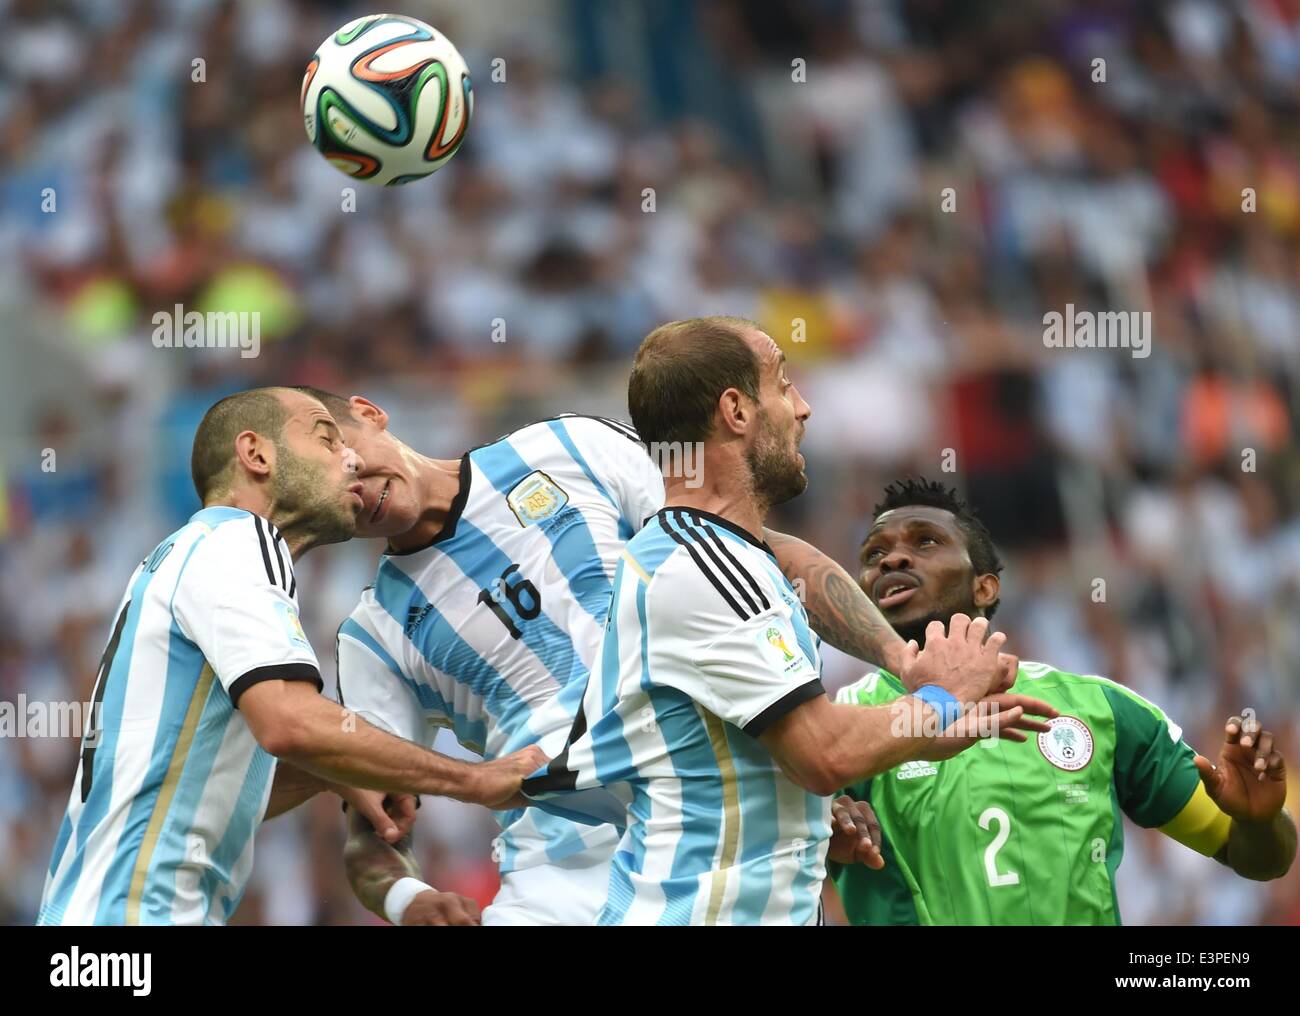 Porto Alegre, Brazil. 25th June, 2014. Nigeria's Joseph Yobo (1st R) competes with Argentina's players during a Group F match between Nigeria and Argentina of 2014 FIFA World Cup at the Estadio Beira-Rio Stadium in Porto Alegre, Brazil, on June 25, 2014. © Li Ga/Xinhua/Alamy Live News Stock Photo